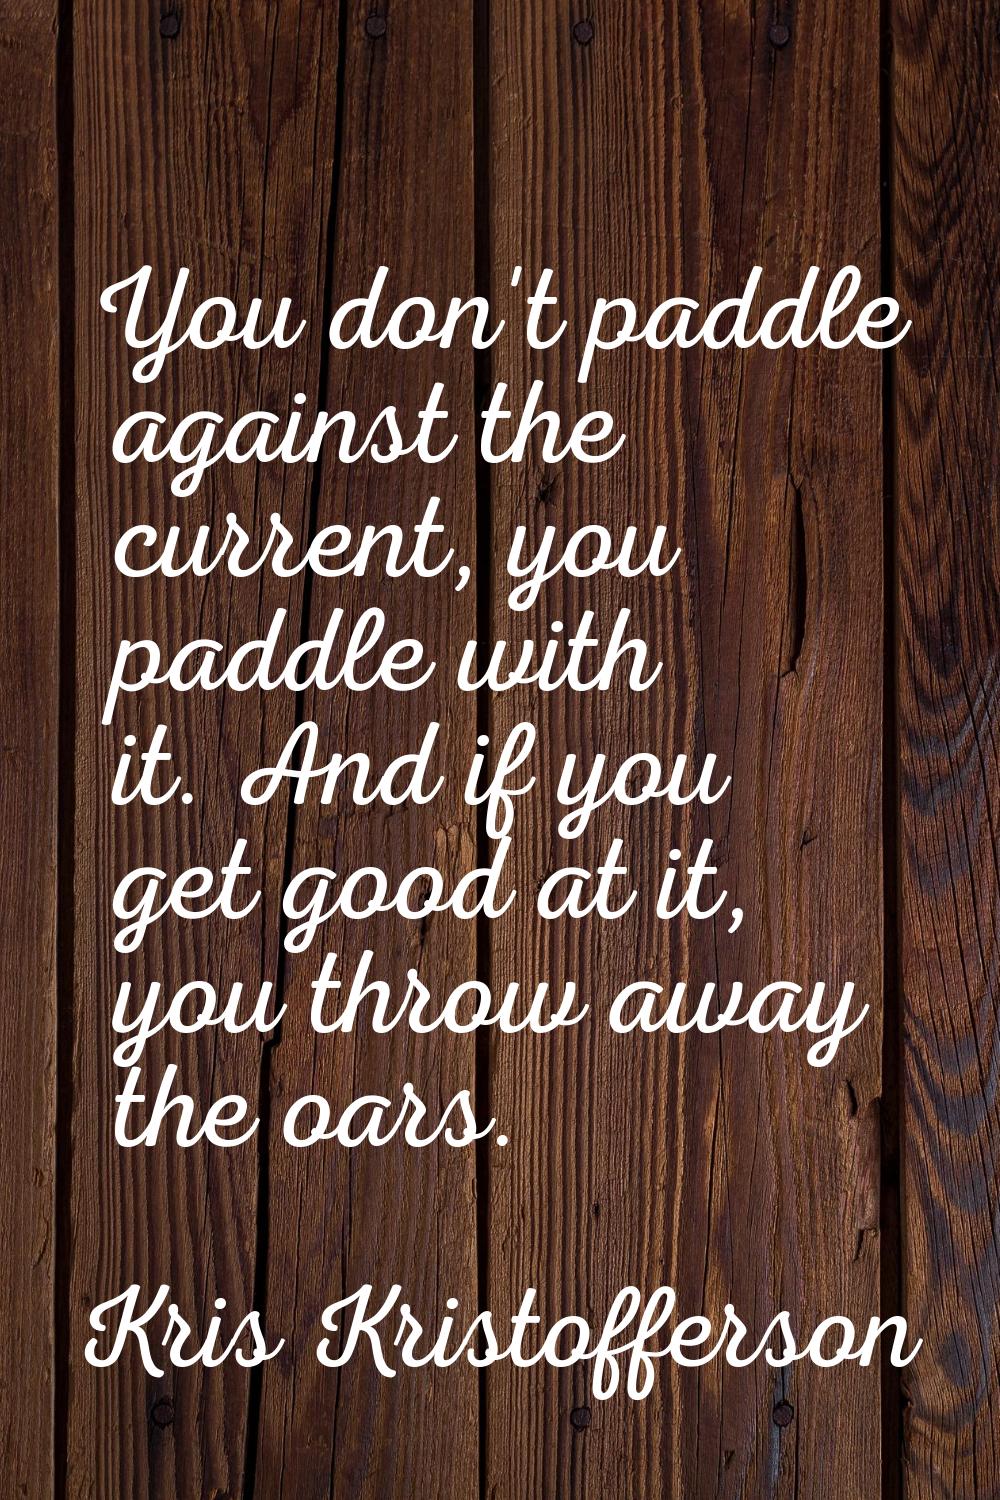 You don't paddle against the current, you paddle with it. And if you get good at it, you throw away